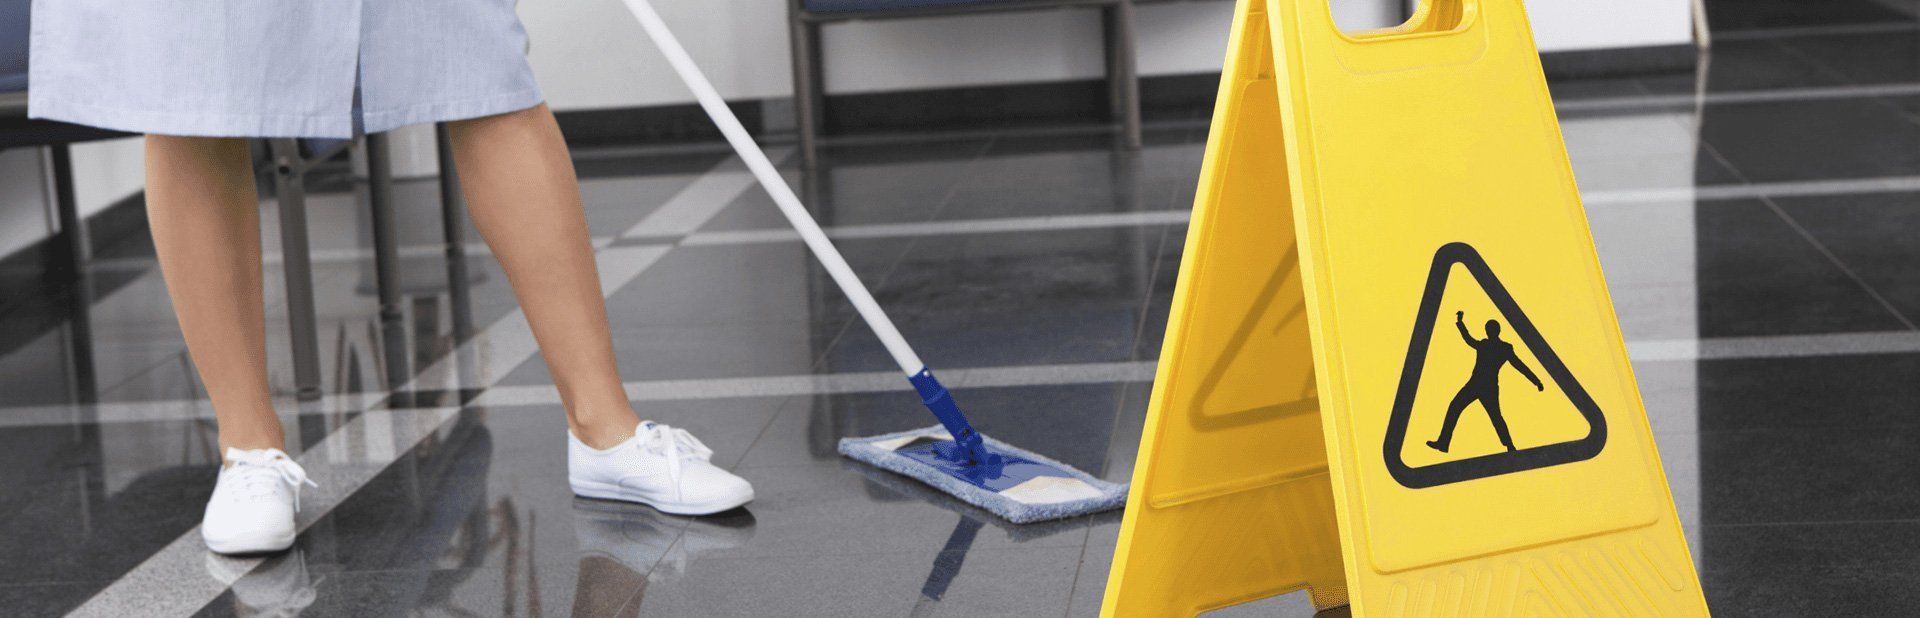 floor cleaning sign